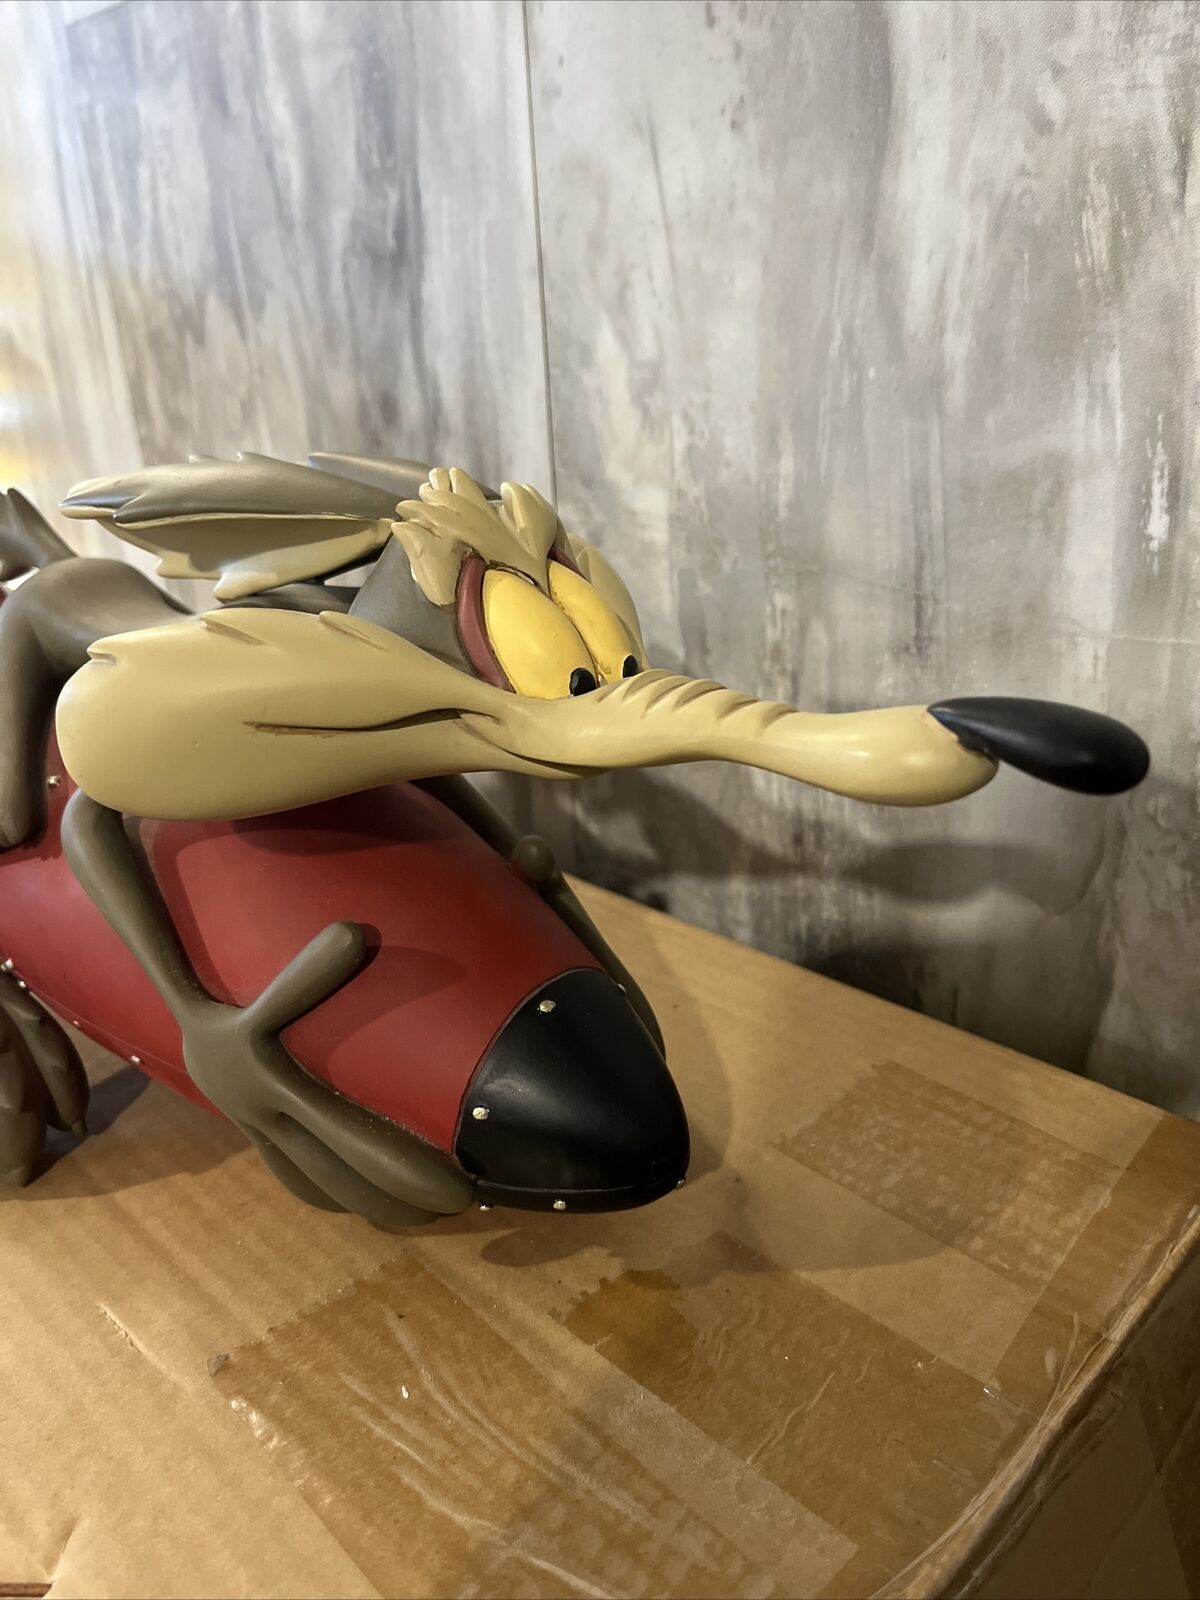 Extremely Rare Looney Tunes Wile E Coyote on Rocket Big Figure Statue RARE 🔥